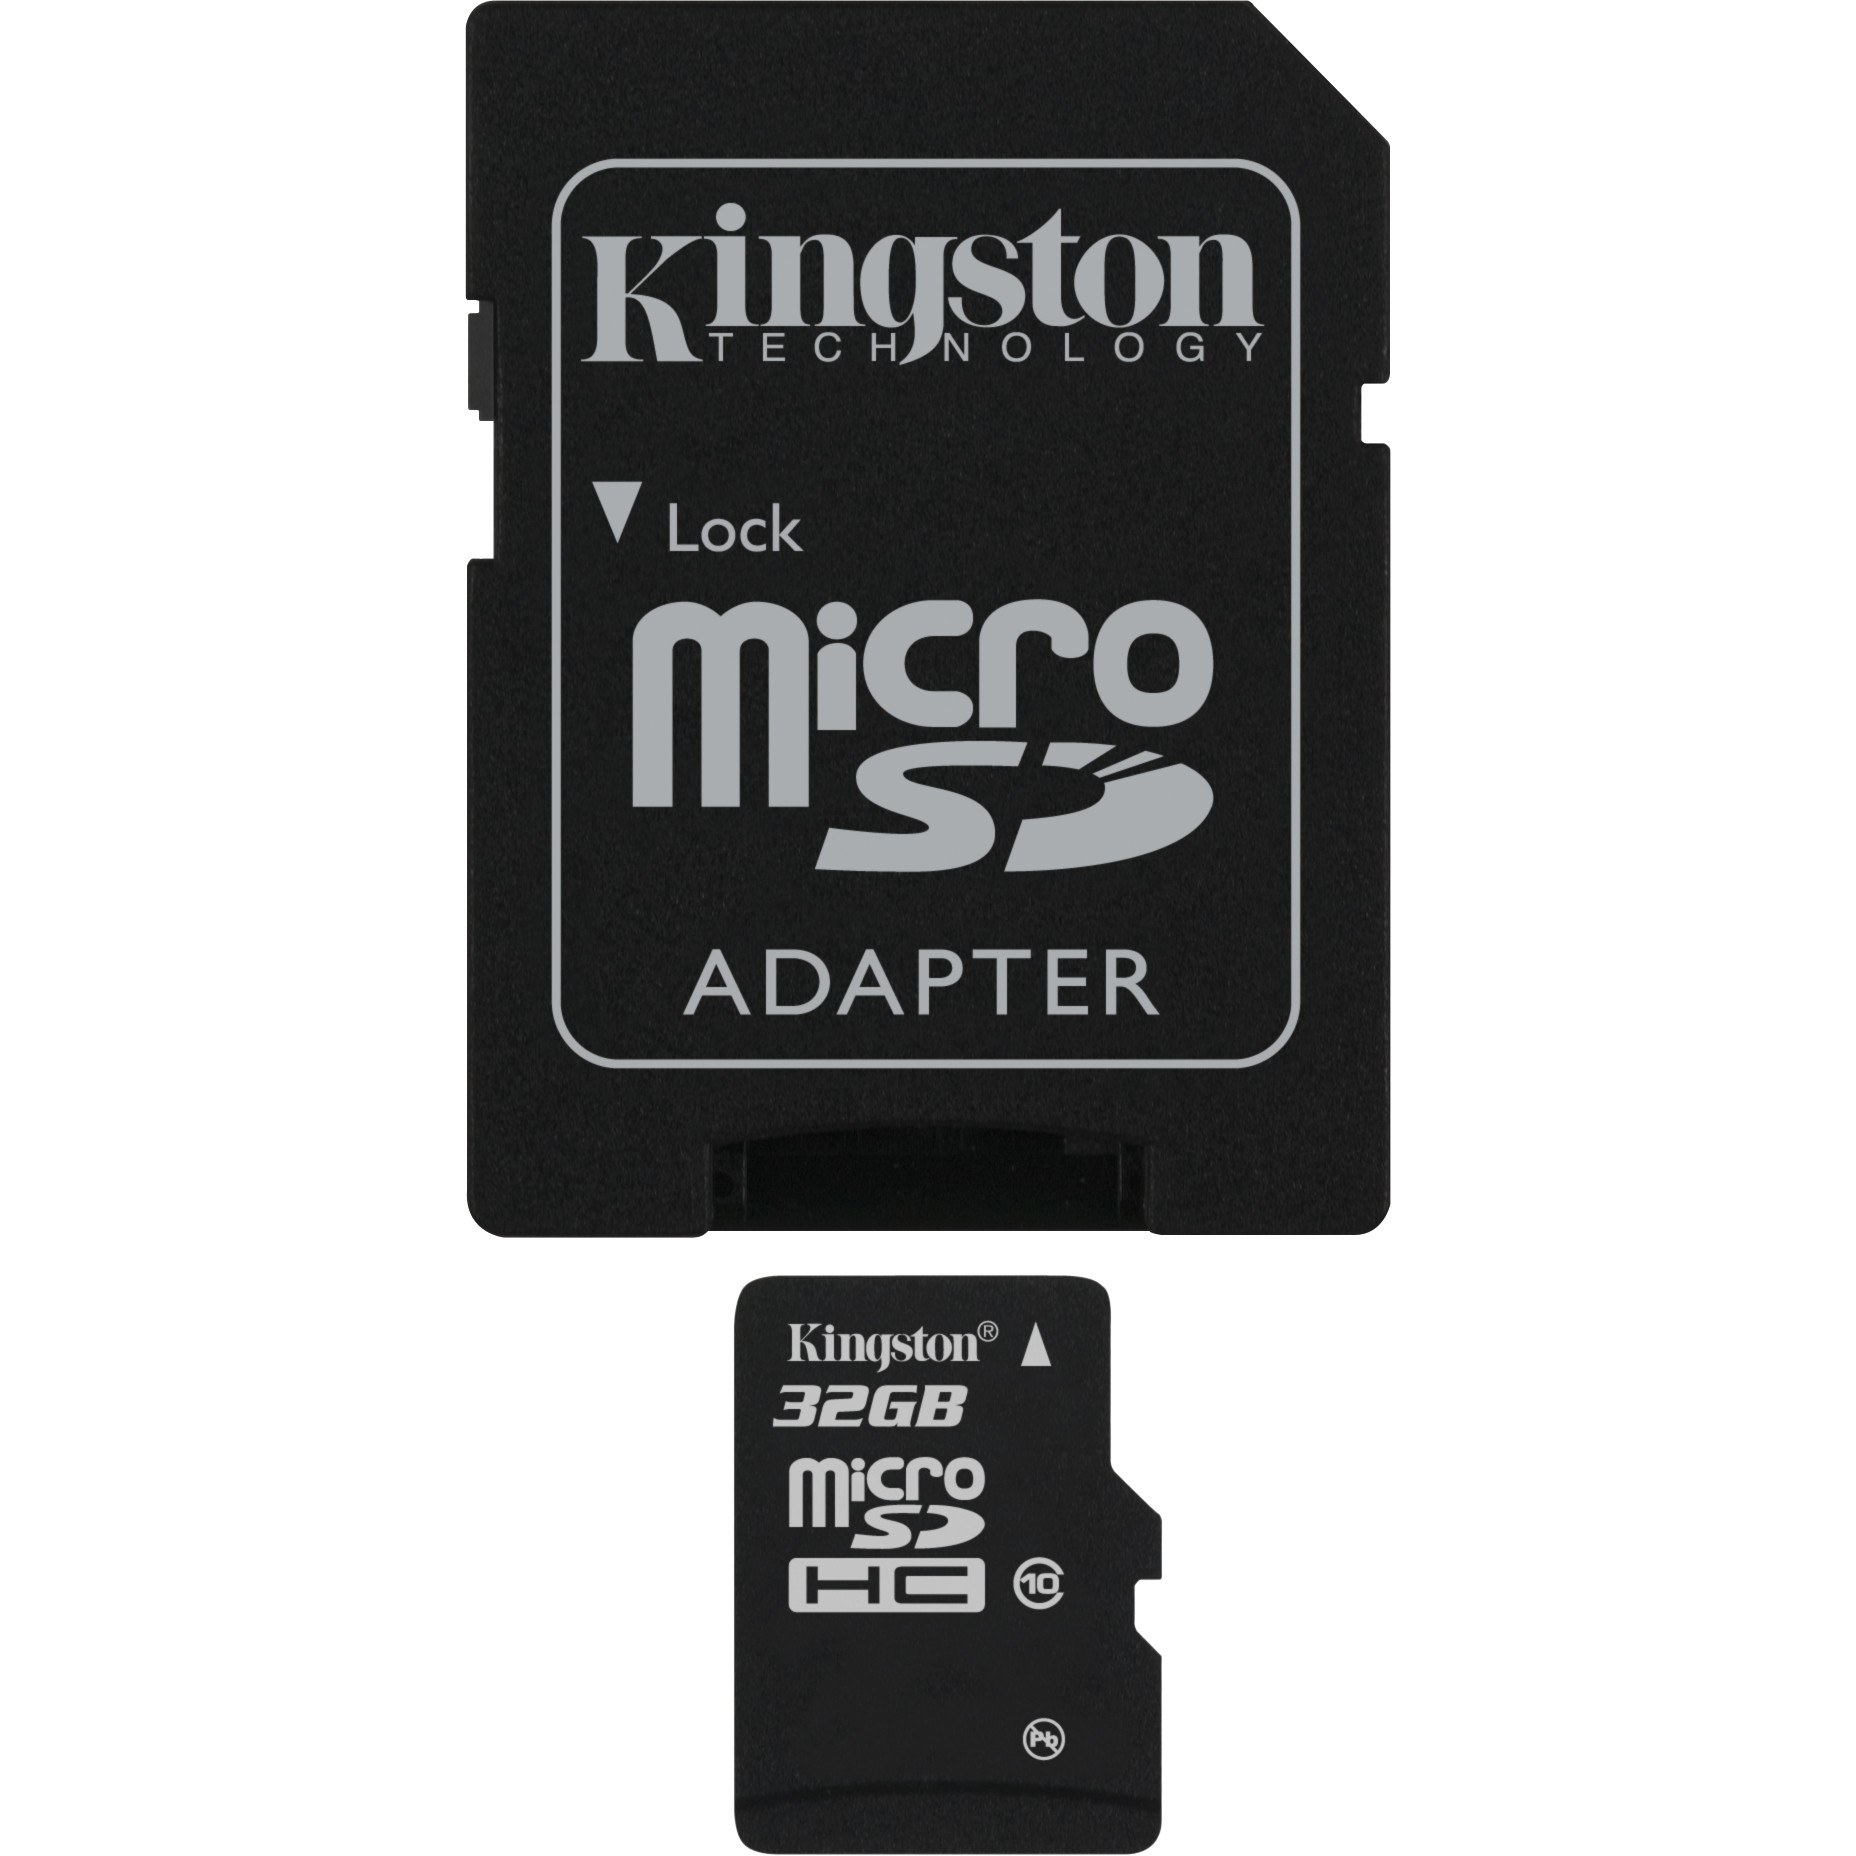 Kingston Industrial Grade 32GB Asus M1 MicroSDHC Card Verified by SanFlash. 90MBs Works for Kingston 